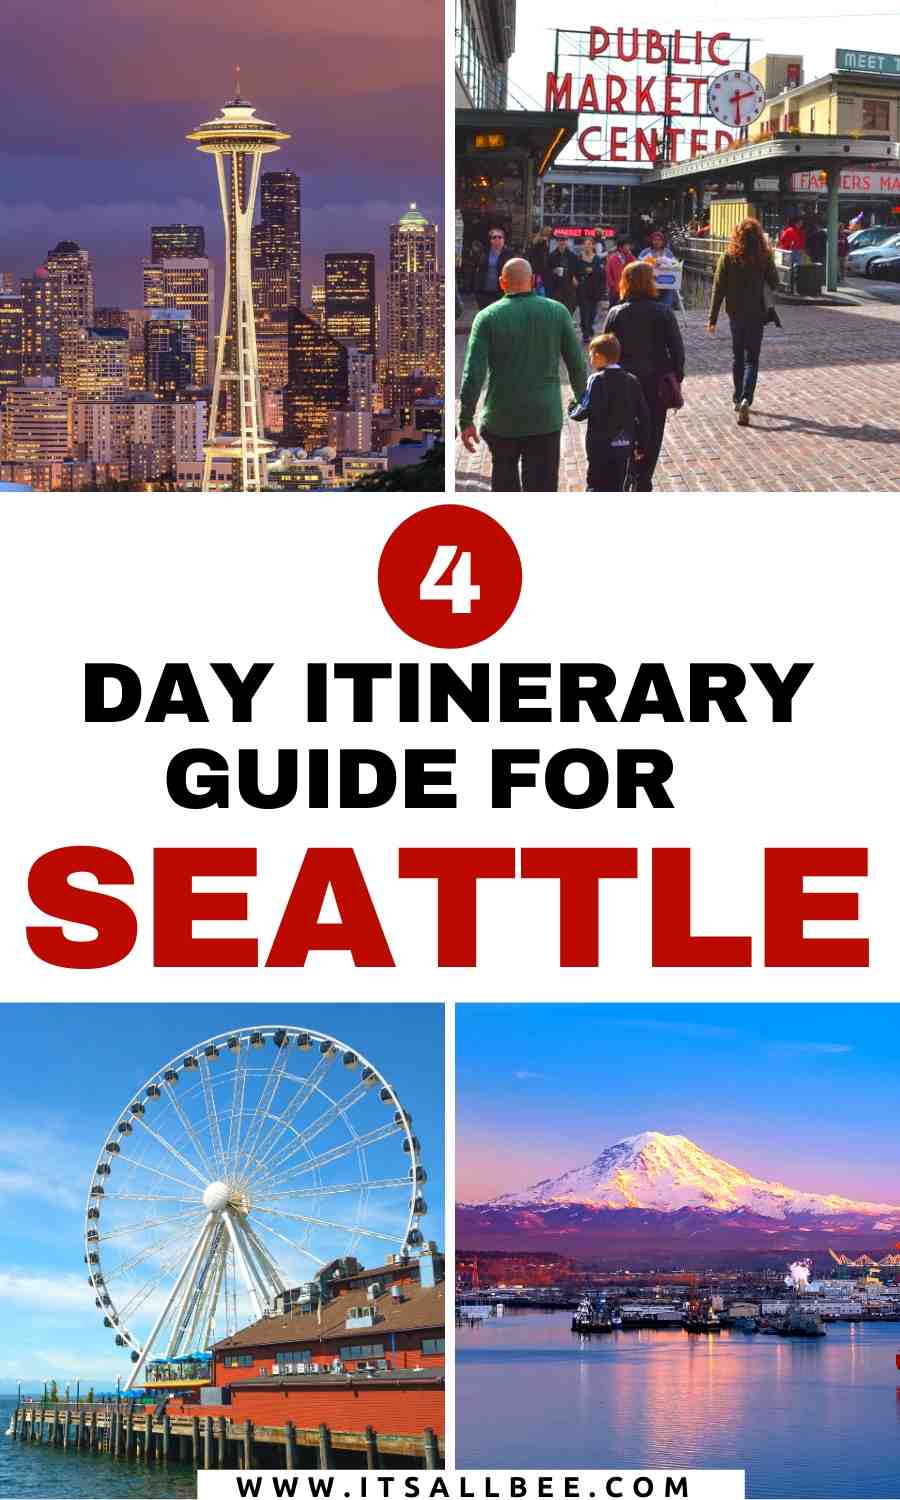 What to see in Seattle in 4 days